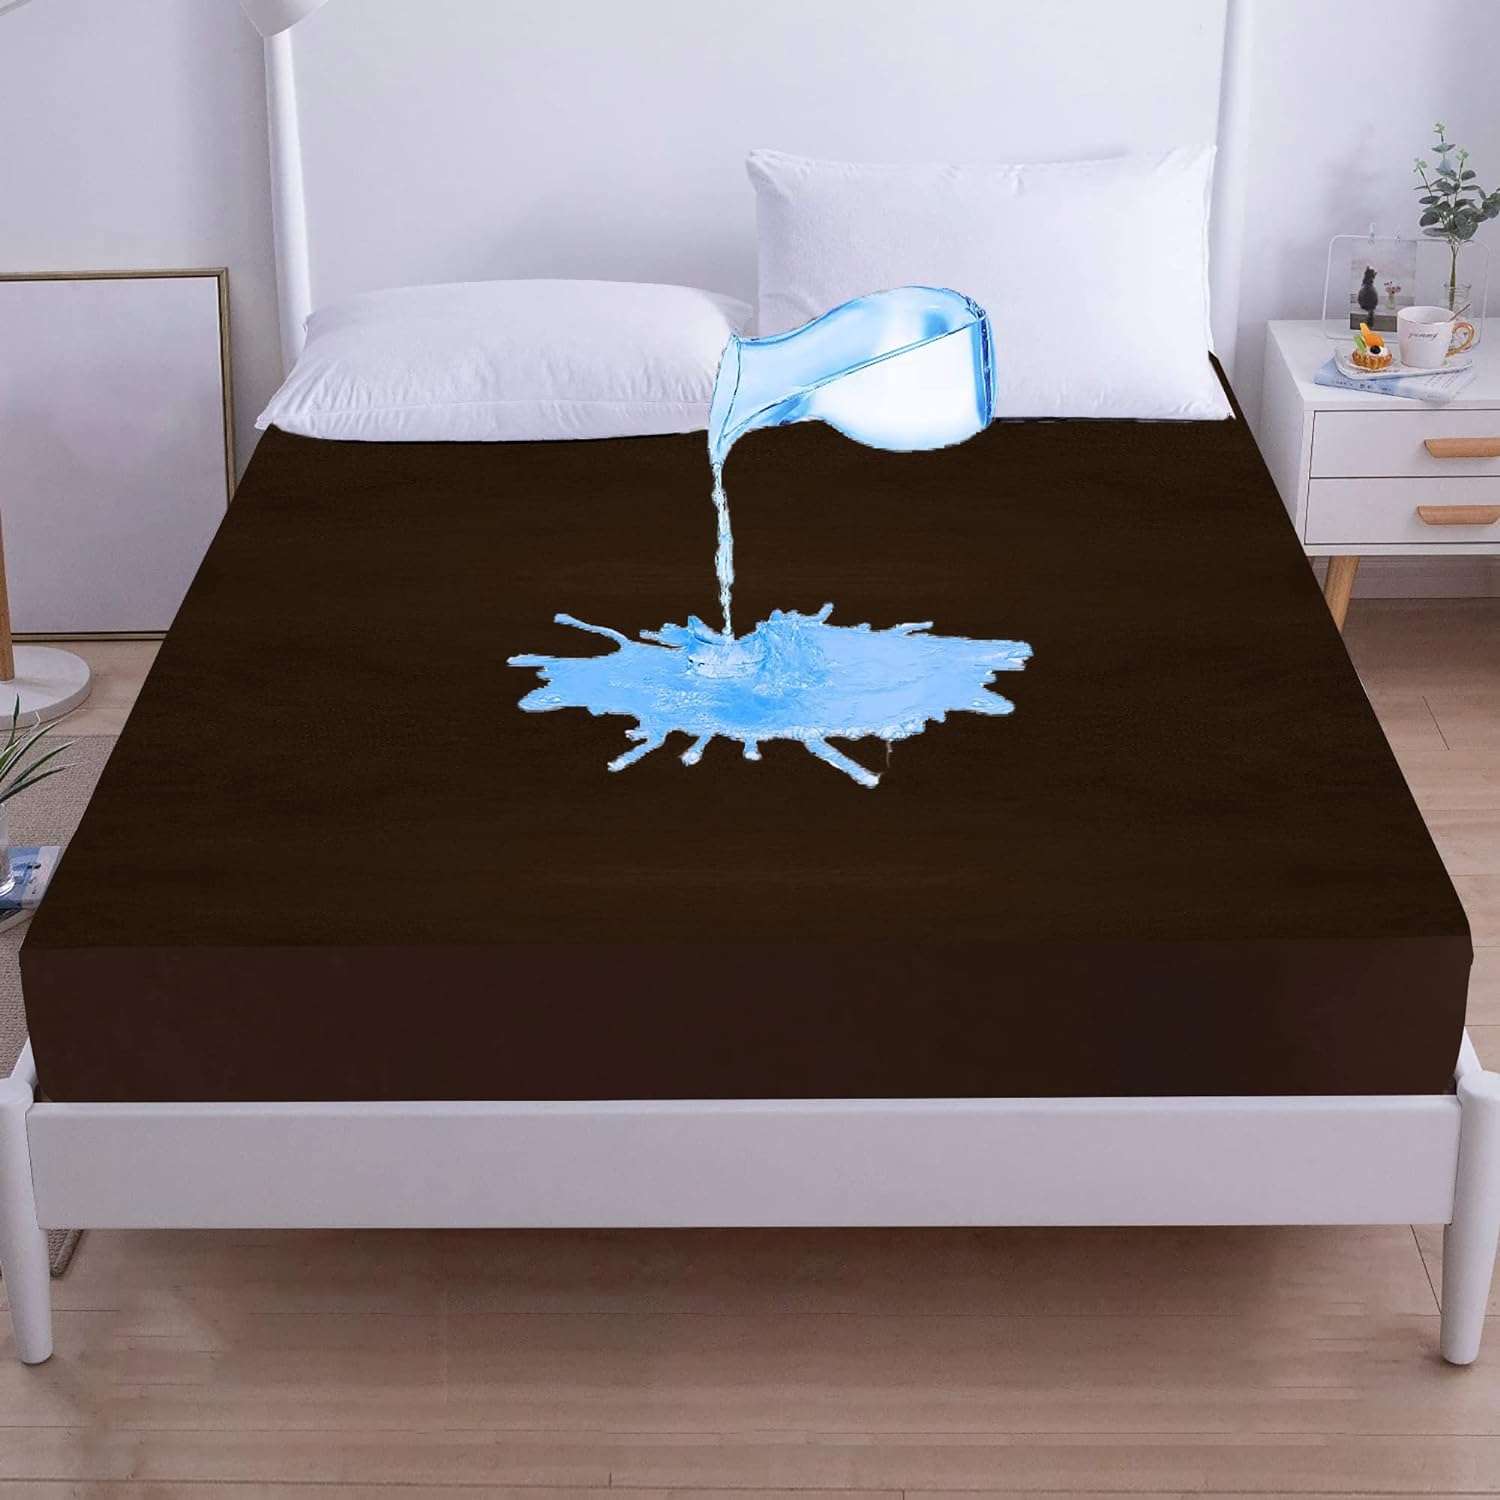 GADDA CO Waterproof Bed Protector Mattress Topper for Duble Bed Cover - 72 * 75 - Coffee